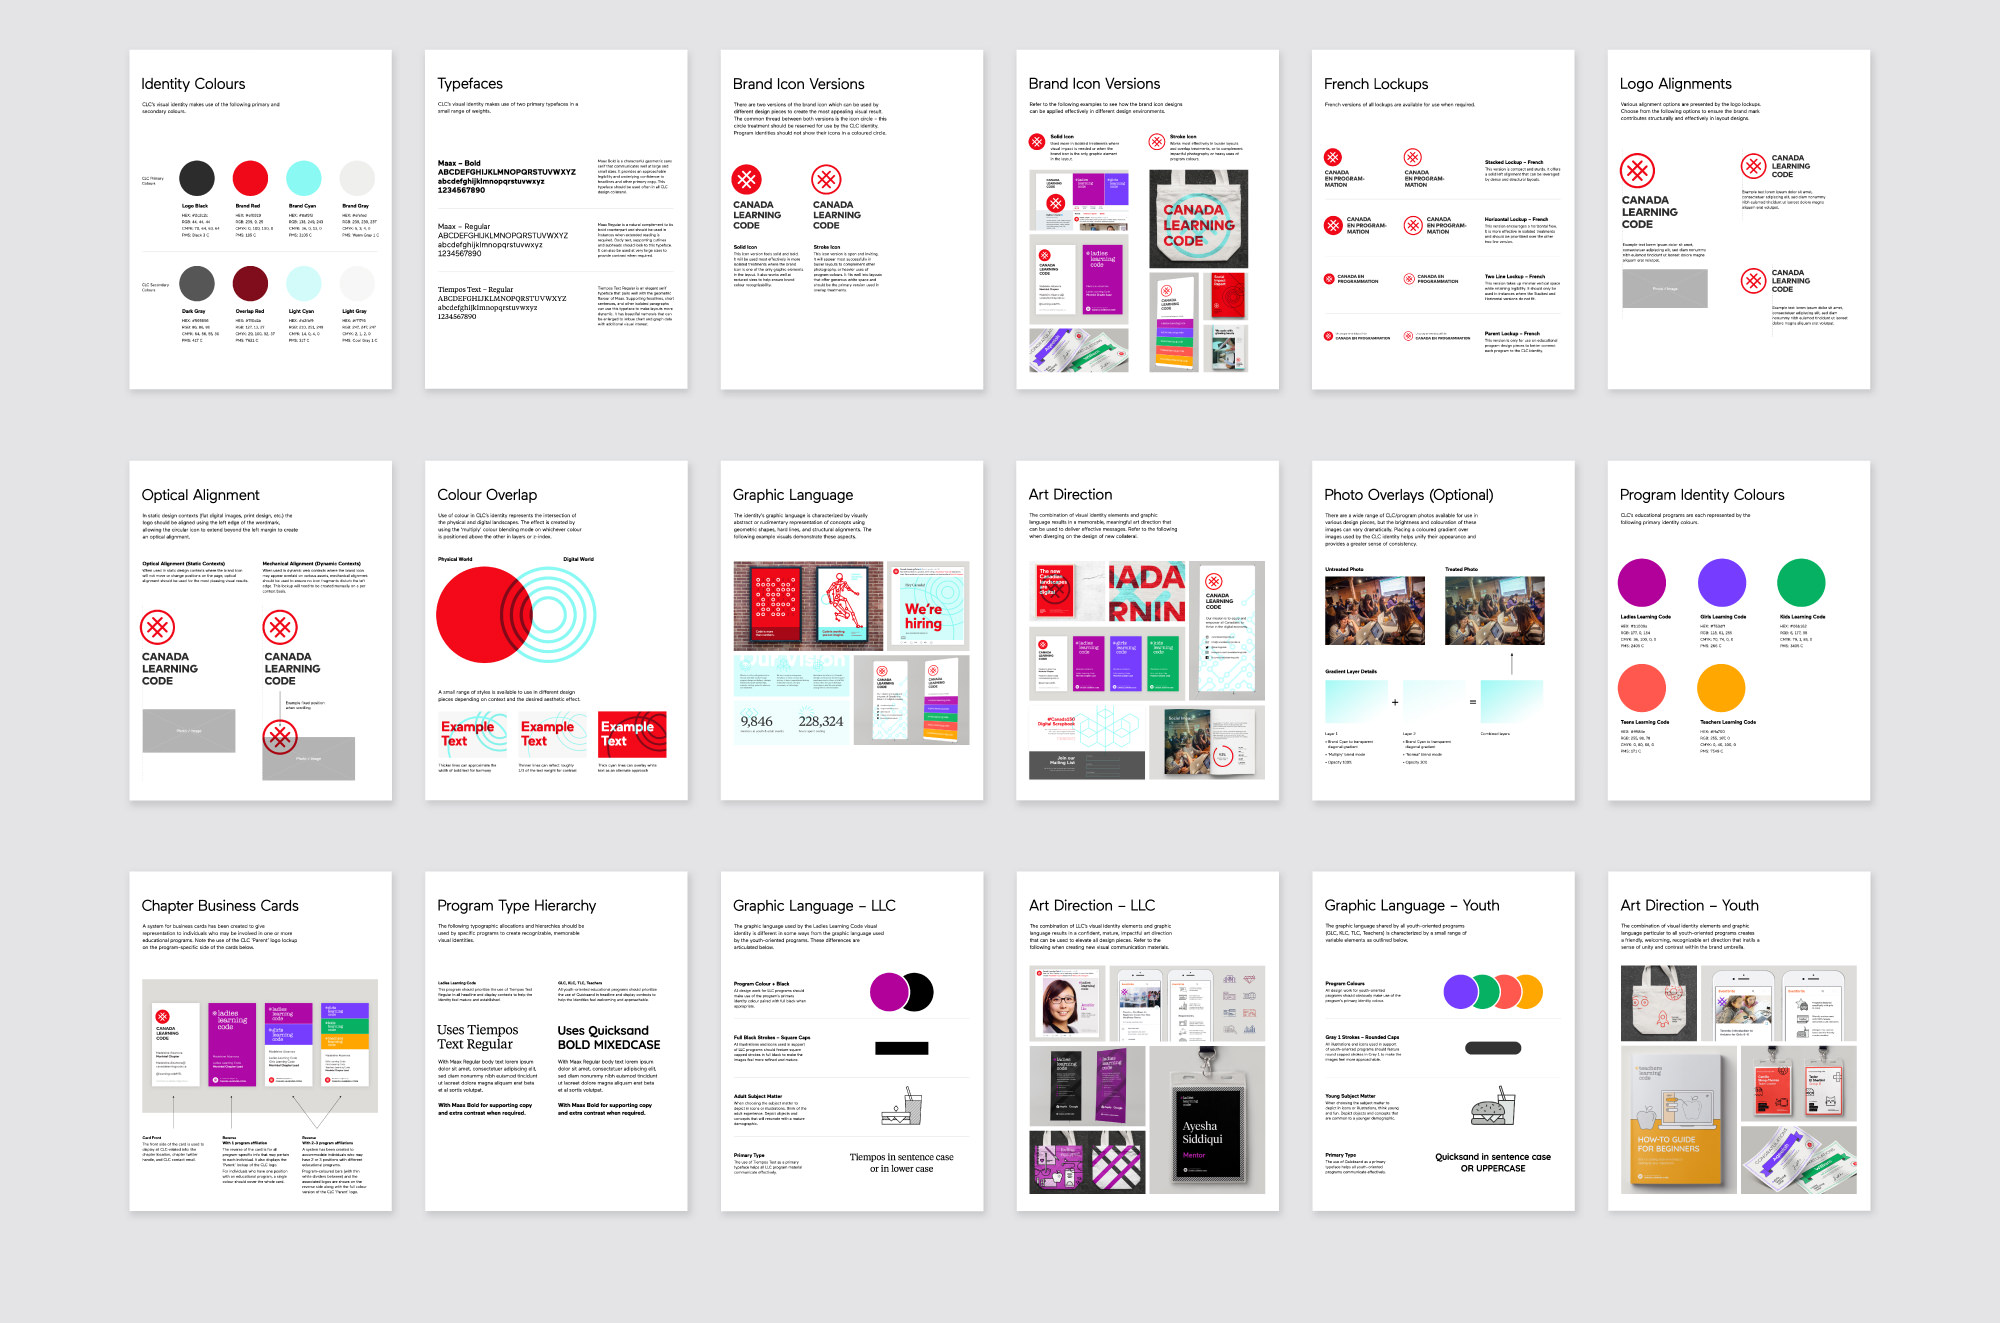 Pages from the visual identity standards guide for Canada Learning Code featuring logo design, colour palette, program identity art direction, and other considerations for consistent use of brand assets